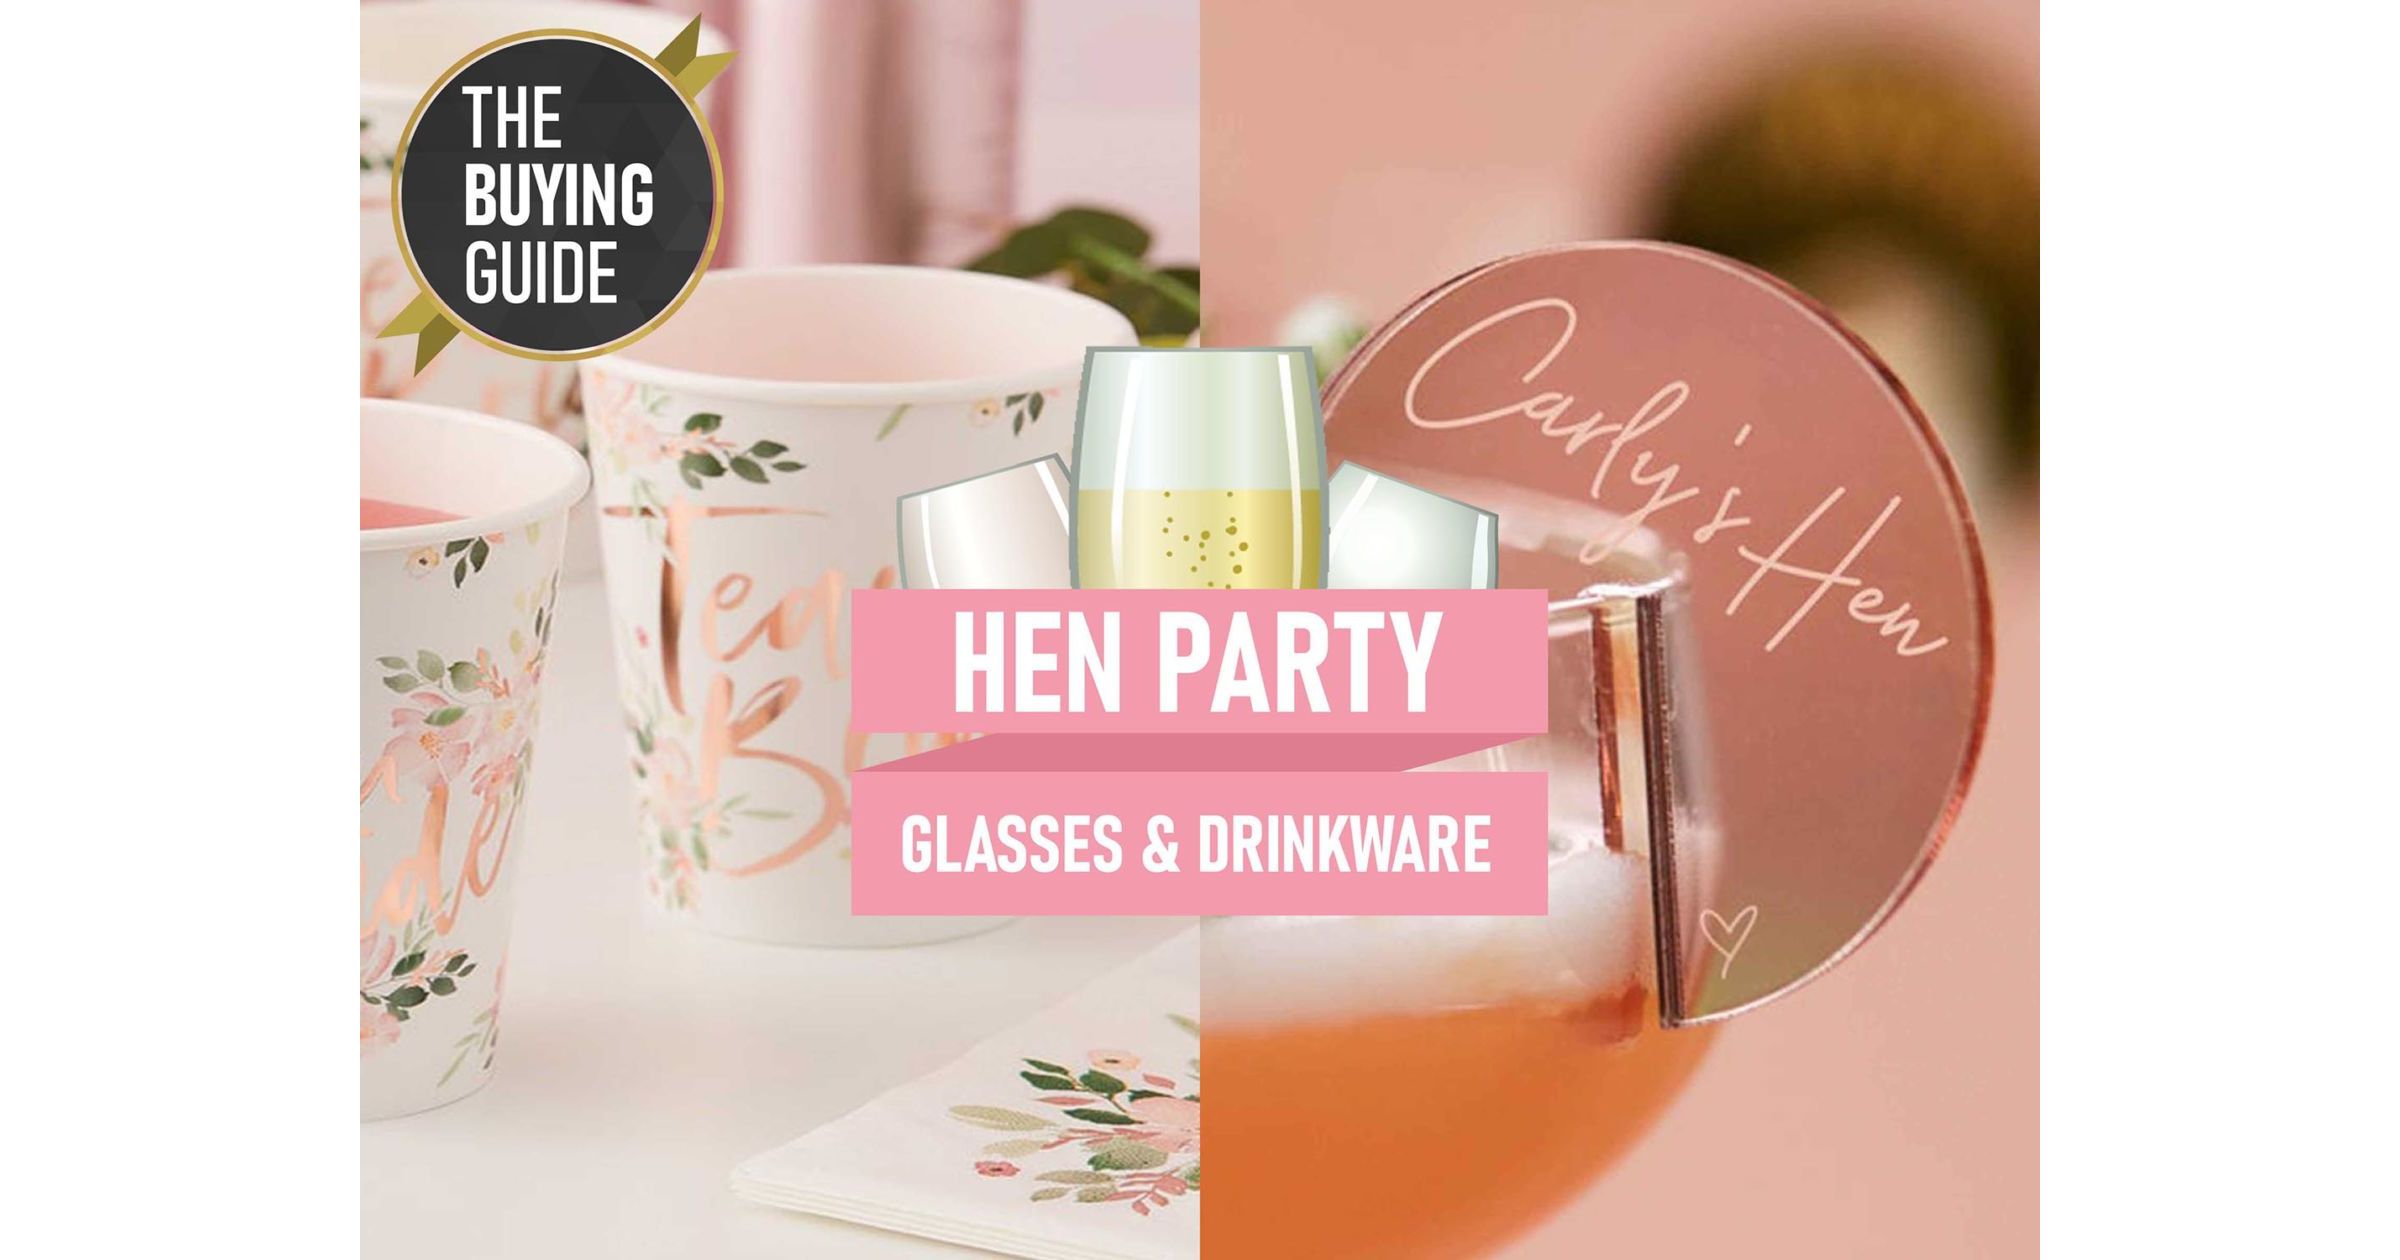 Hen Party Glasses – The Buying Guide